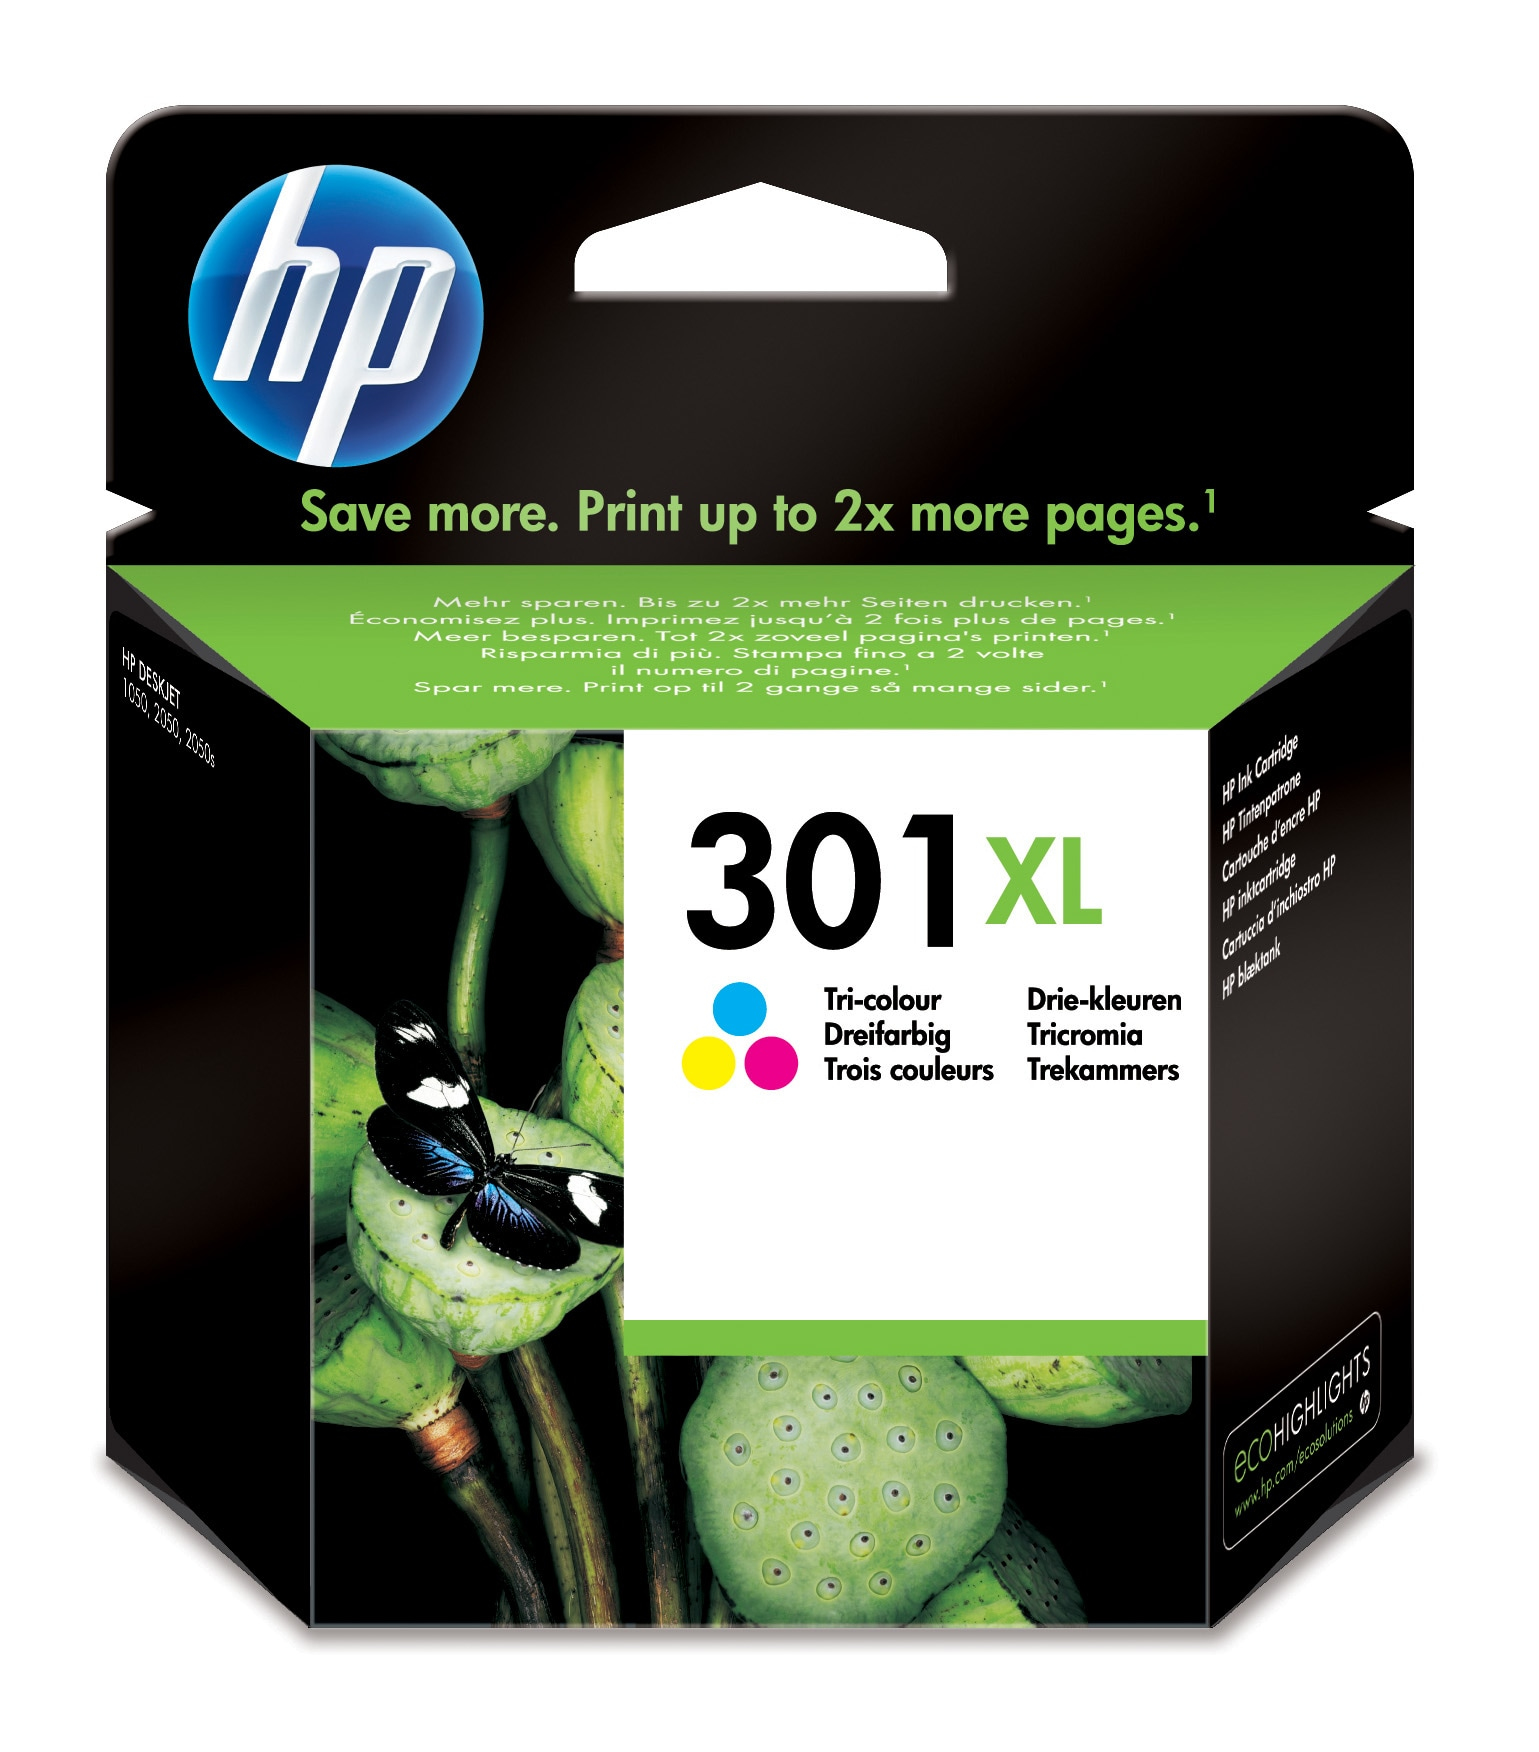  301XL Original Inktcartridge CH564EE BA3 tri-colour high capacity 330 pages 1-pack